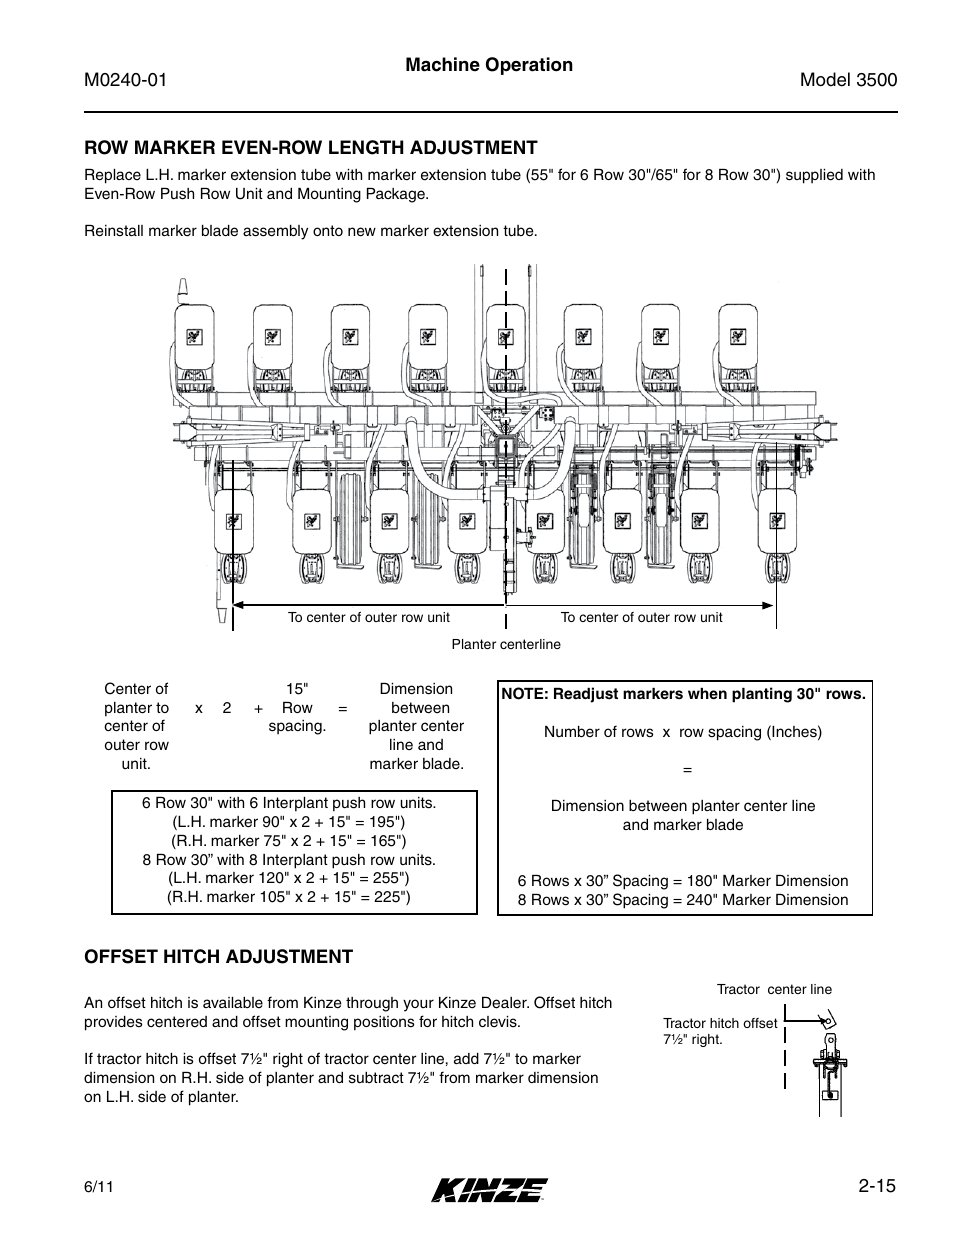 Row marker even-row length adjustment, Offset hitch adjustment, Row marker even-row length adjustment -15 | Offset hitch adjustment -15 | Kinze 3500 Lift and Rotate Planter Rev. 7/14 User Manual | Page 27 / 140